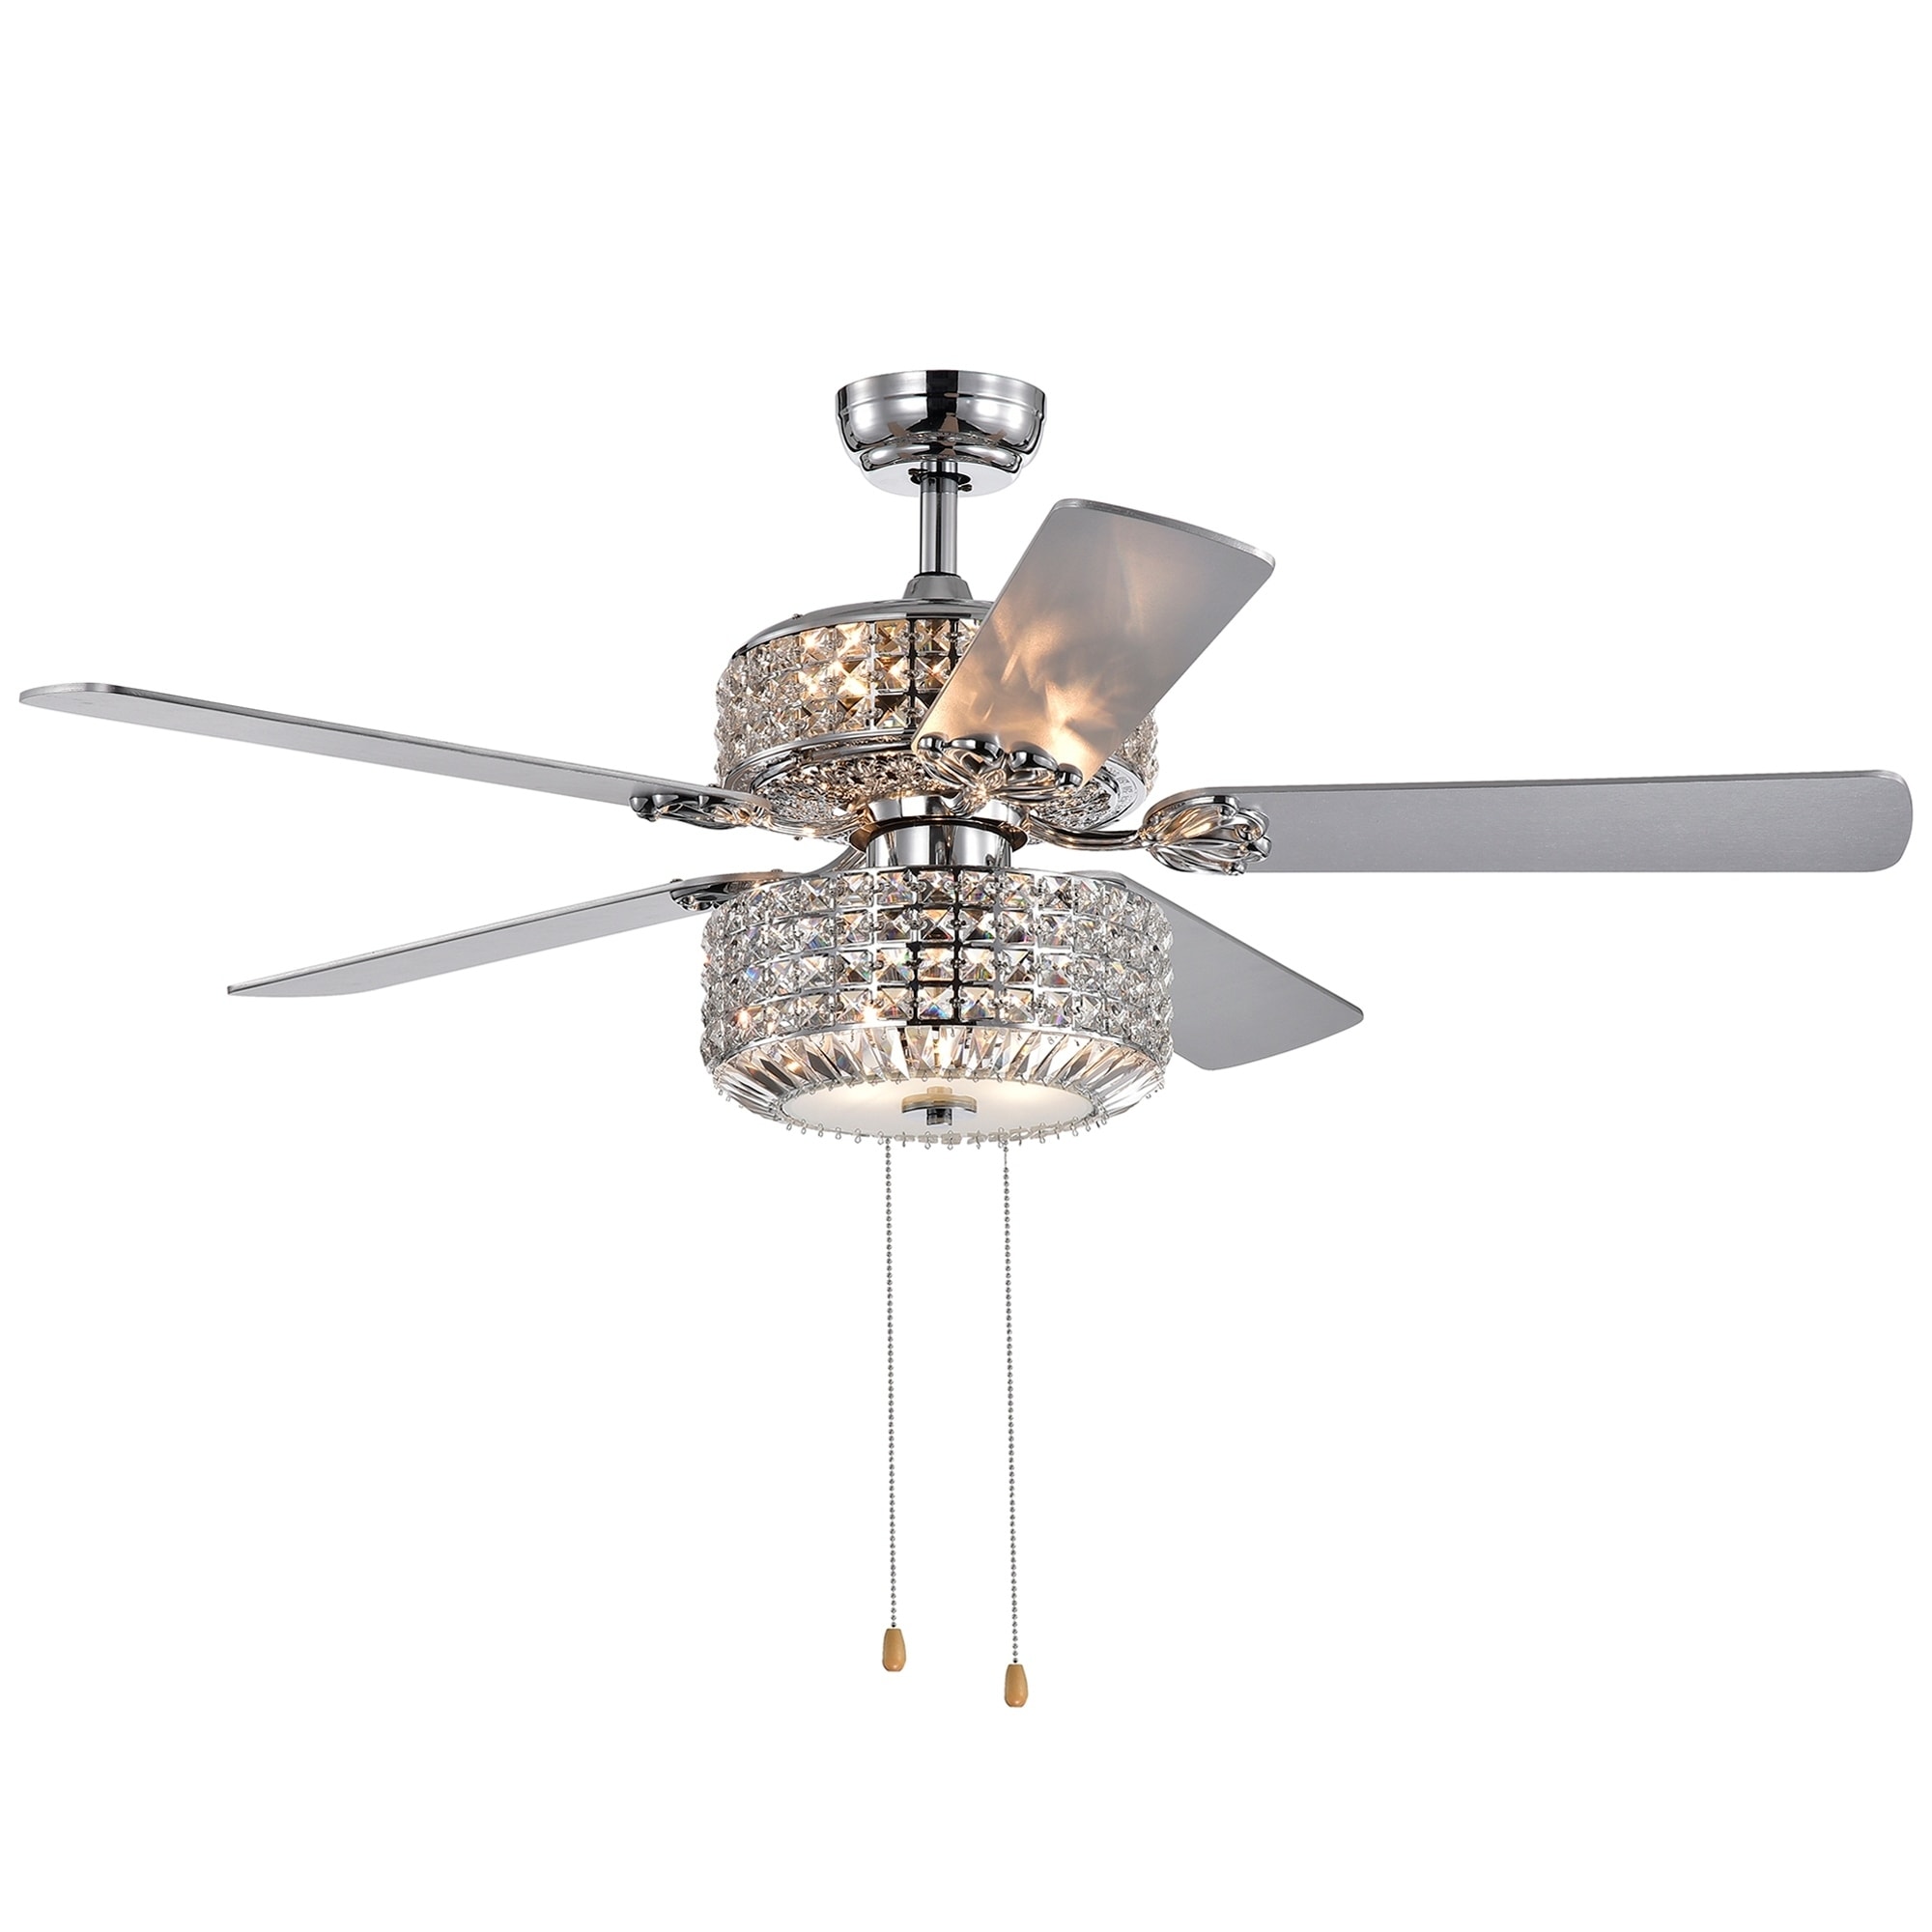 Shop Walter Dual Lamp Chrome 52 Inch Lighted Ceiling Fan W Crystal